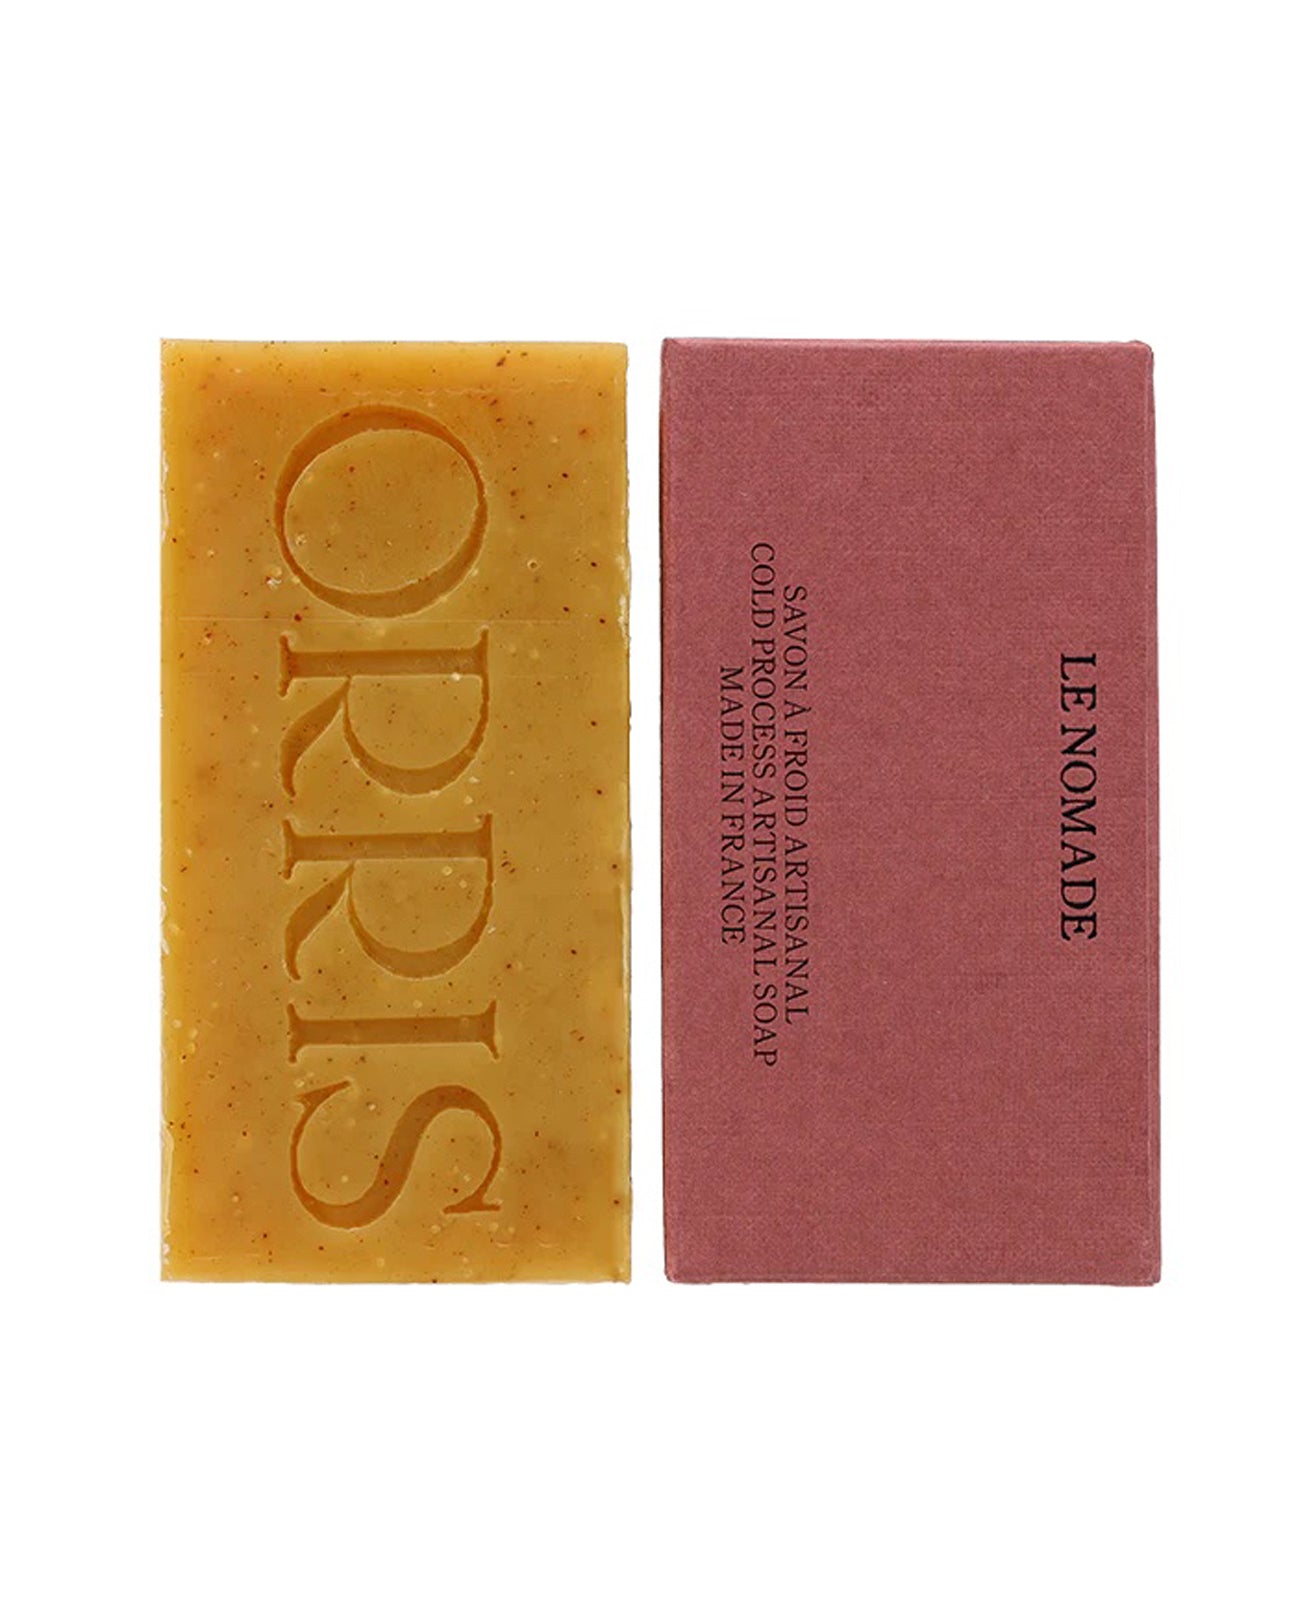 ORRIS All Natural Cold Process Soap in Le Nomade available at Lahn.shop